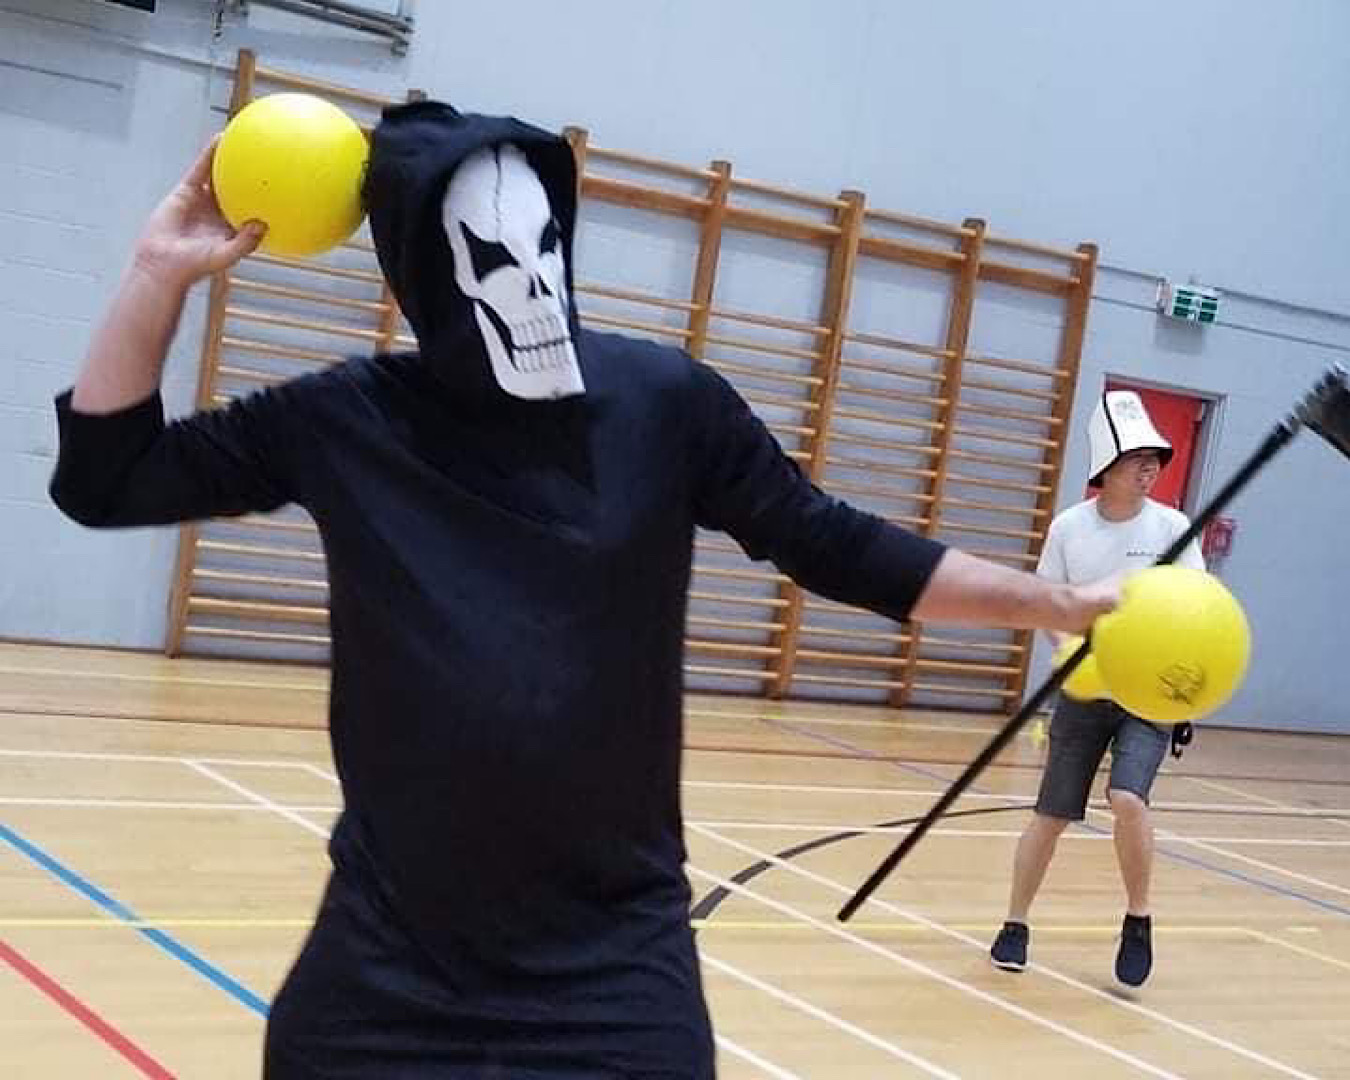 A person dressed as the Grim Reaper prepares to throw a ball at someone in Halloween Dodgeball, one of the best Halloween events in Auckland this year.